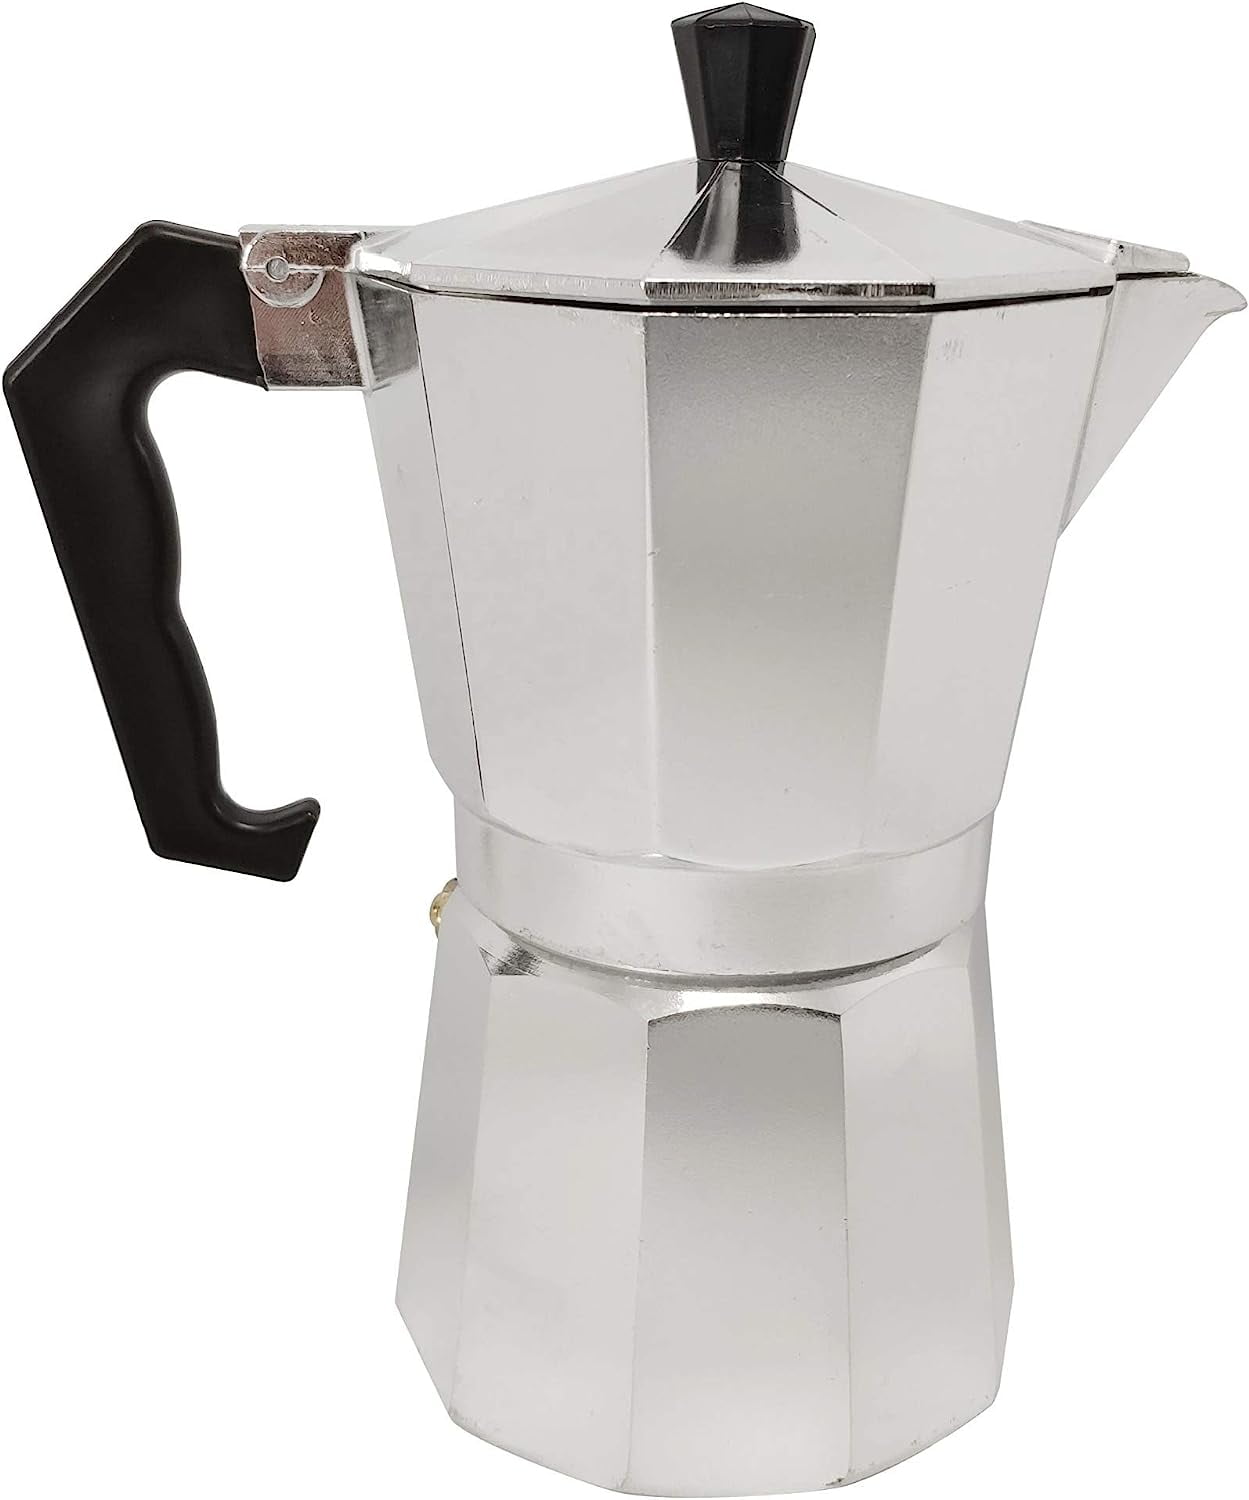 MVPLUE Classic Stovetop Espresso Maker 6 Cup ，Moka Pot Aluminum  Silver，Cuban Coffee Maker， Make Delicious Coffee Easily at Home And Camping